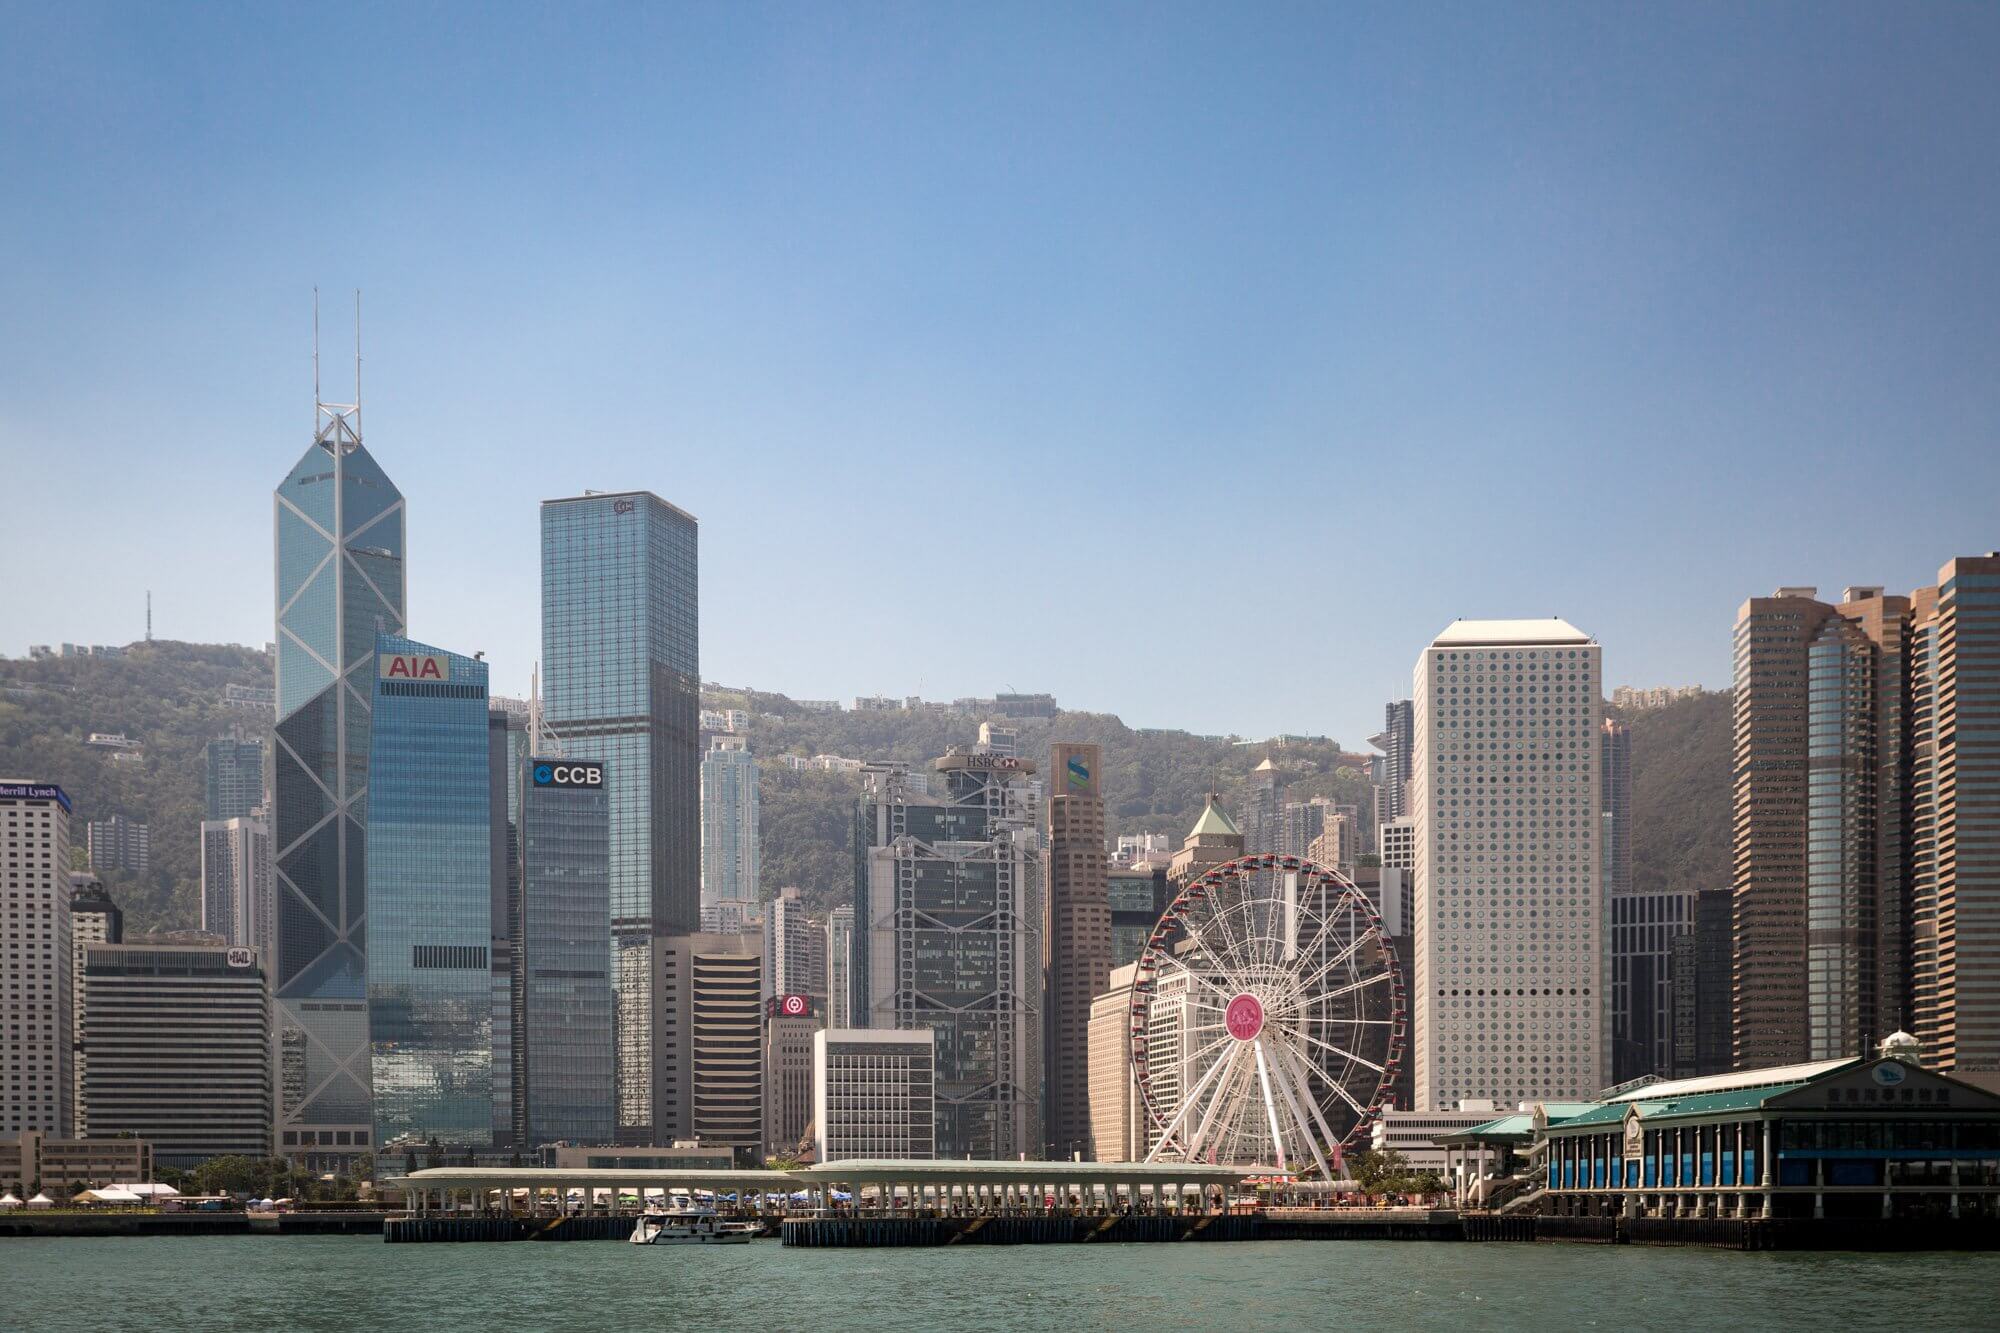 The Hong Kong skyline as seen from aboard the Star Ferry